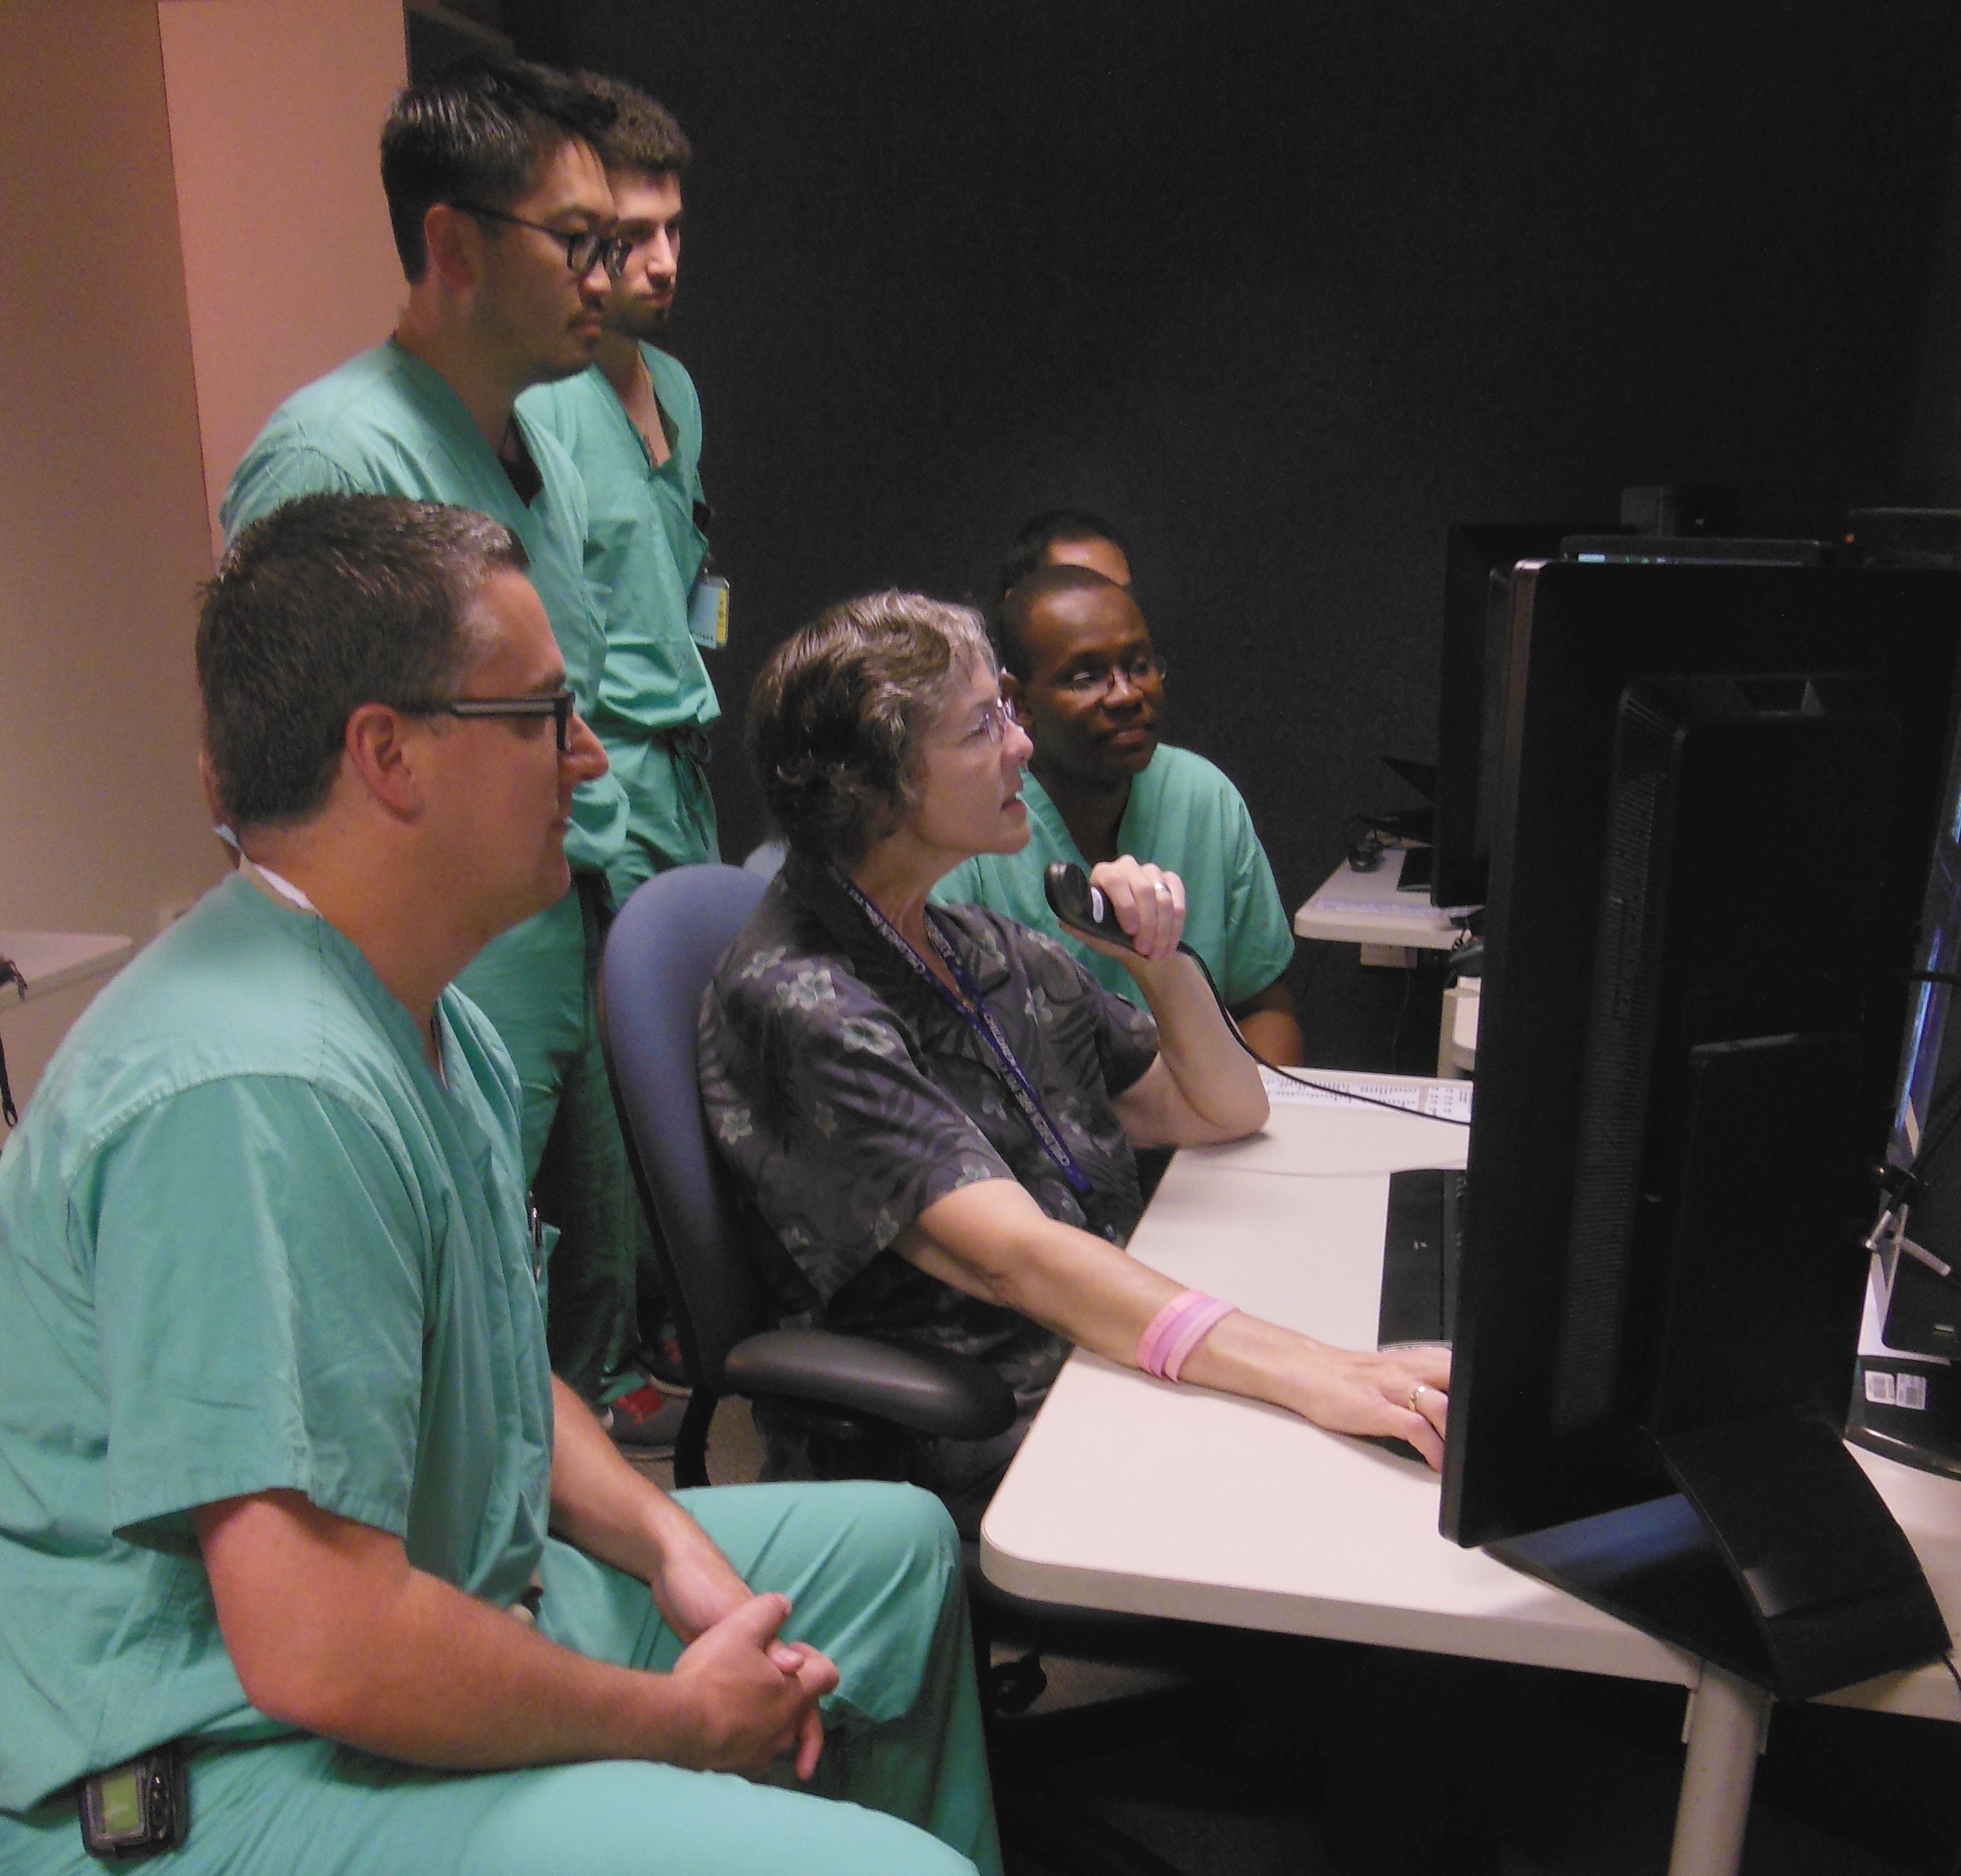 Dr Mike Saint-Louis (to left of instructor) studies pediatric imaging for one month elective at UC Davis.